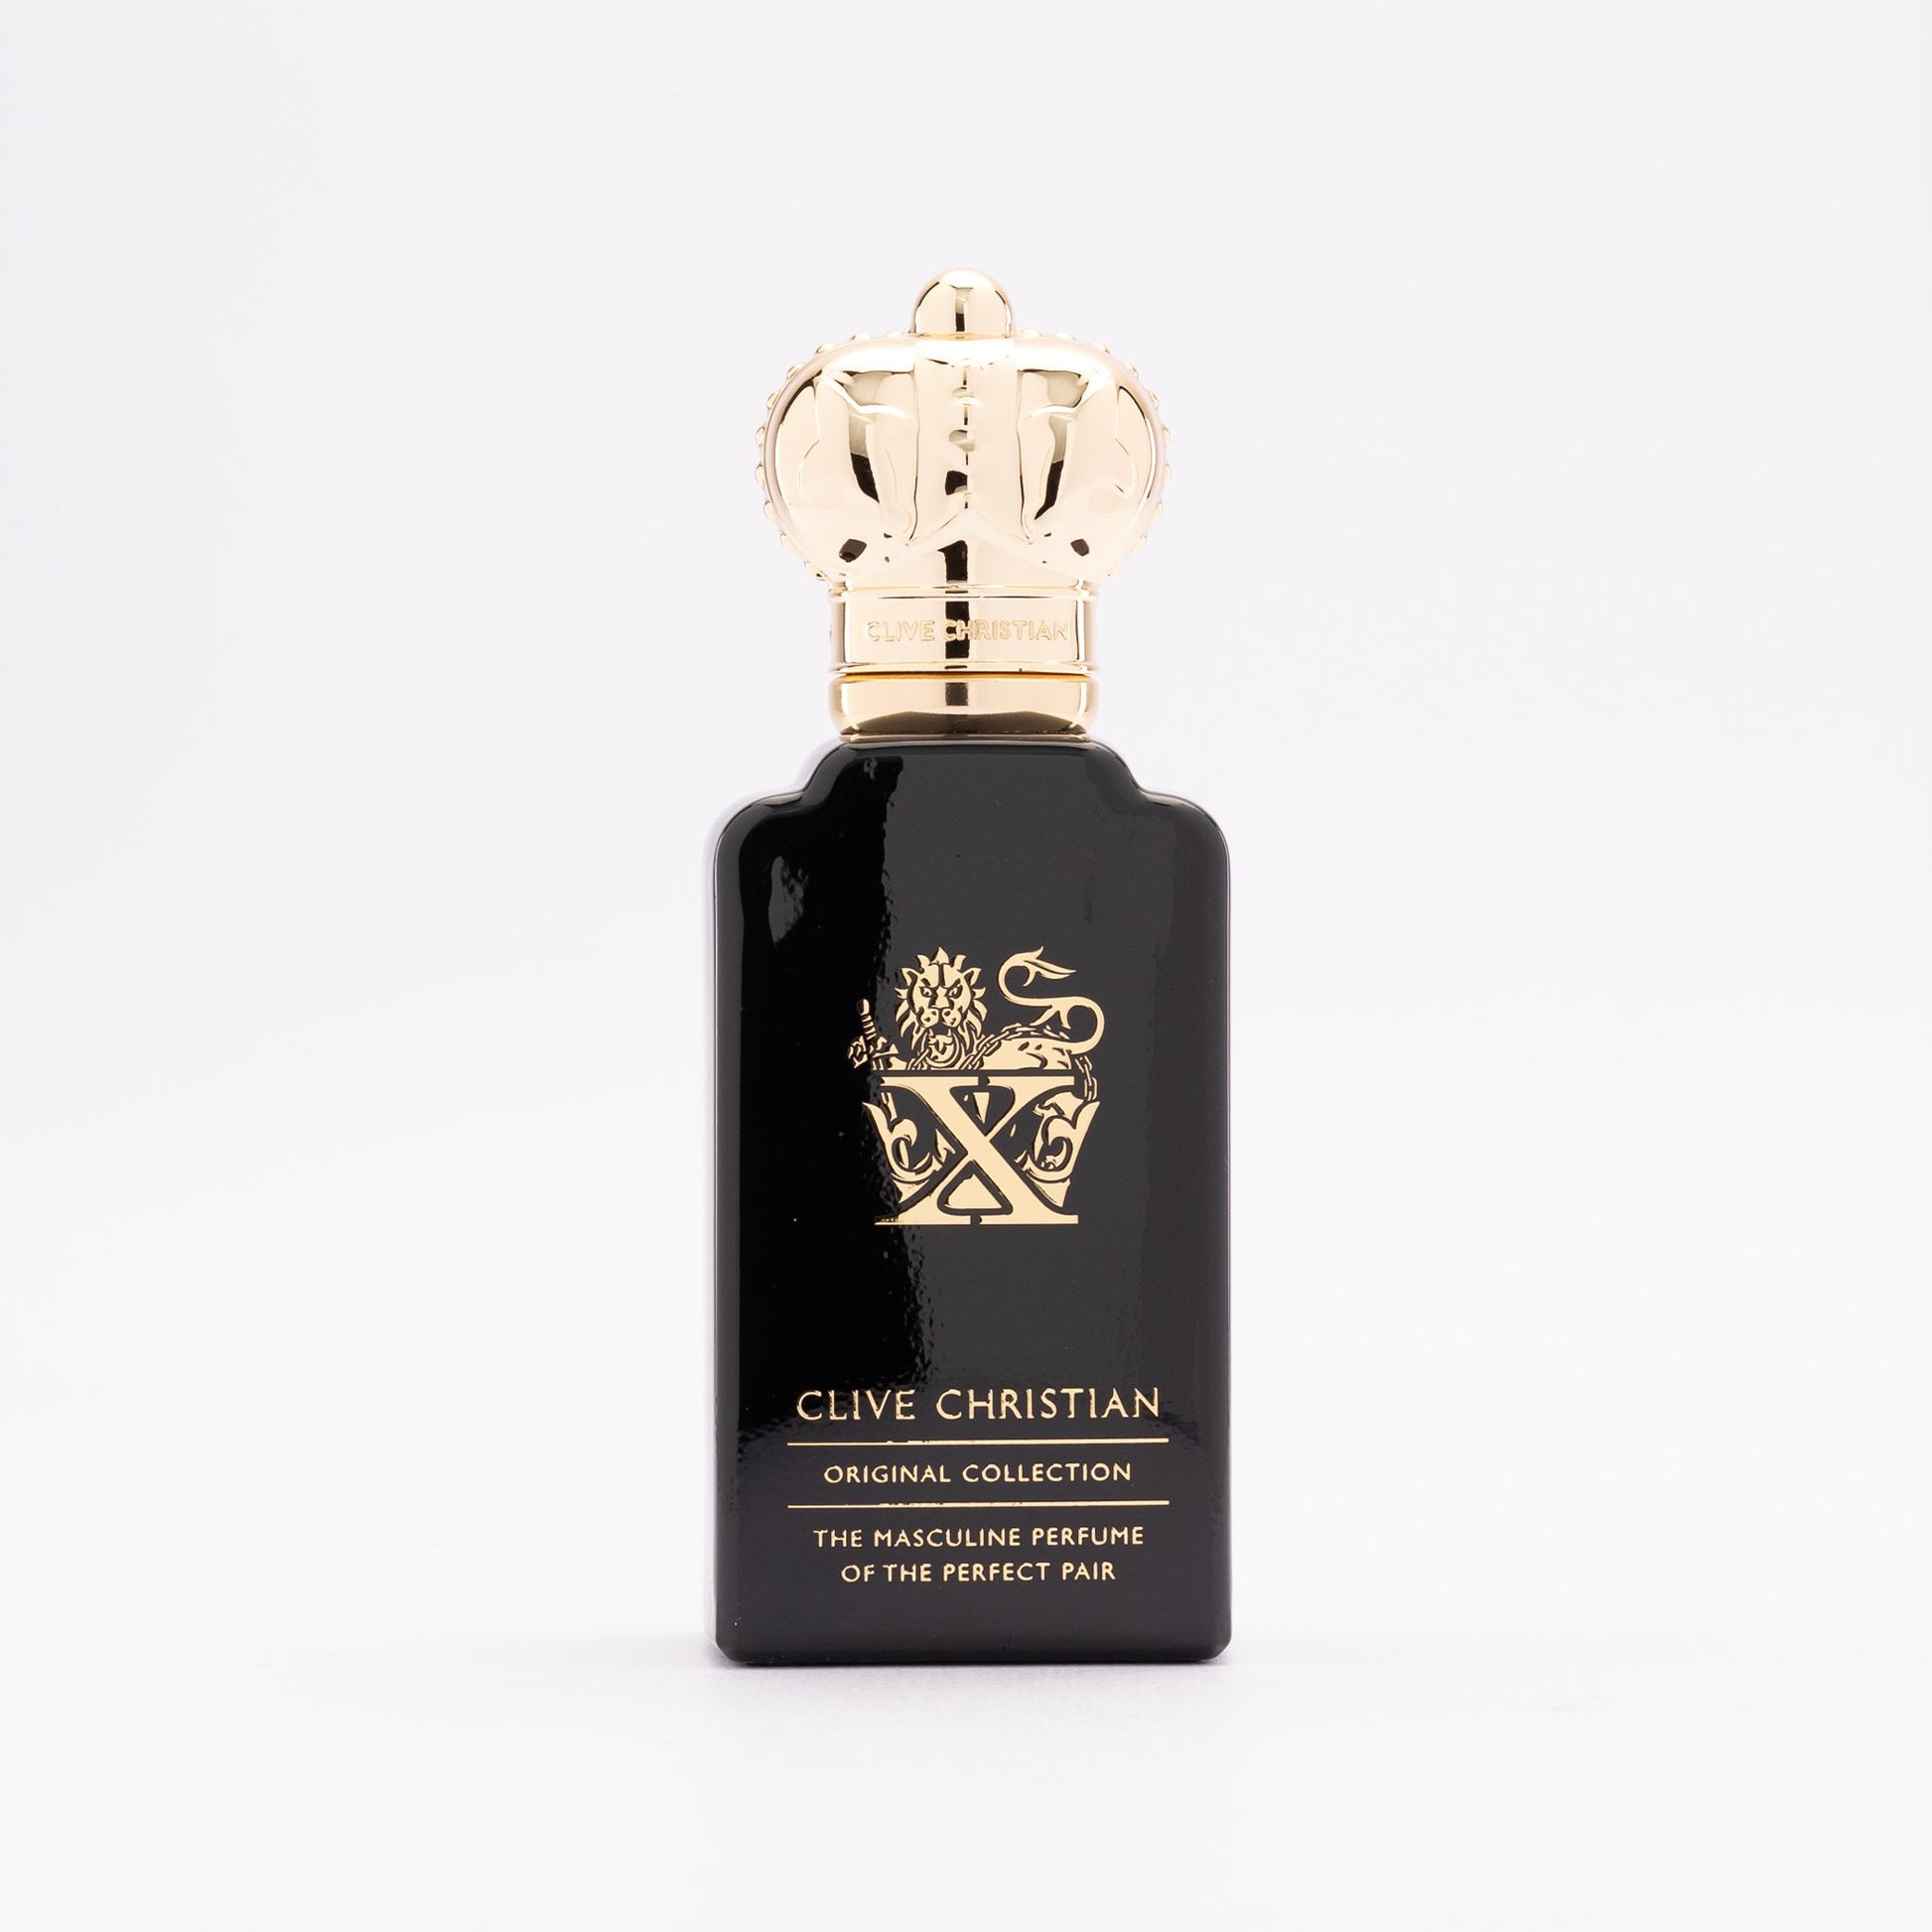 https://otroperfume.com/cdn/shop/products/clive-christian-x-the-masculine-perfume-of-the-perfect-pair-frente.jpg?v=1699606400&width=1946